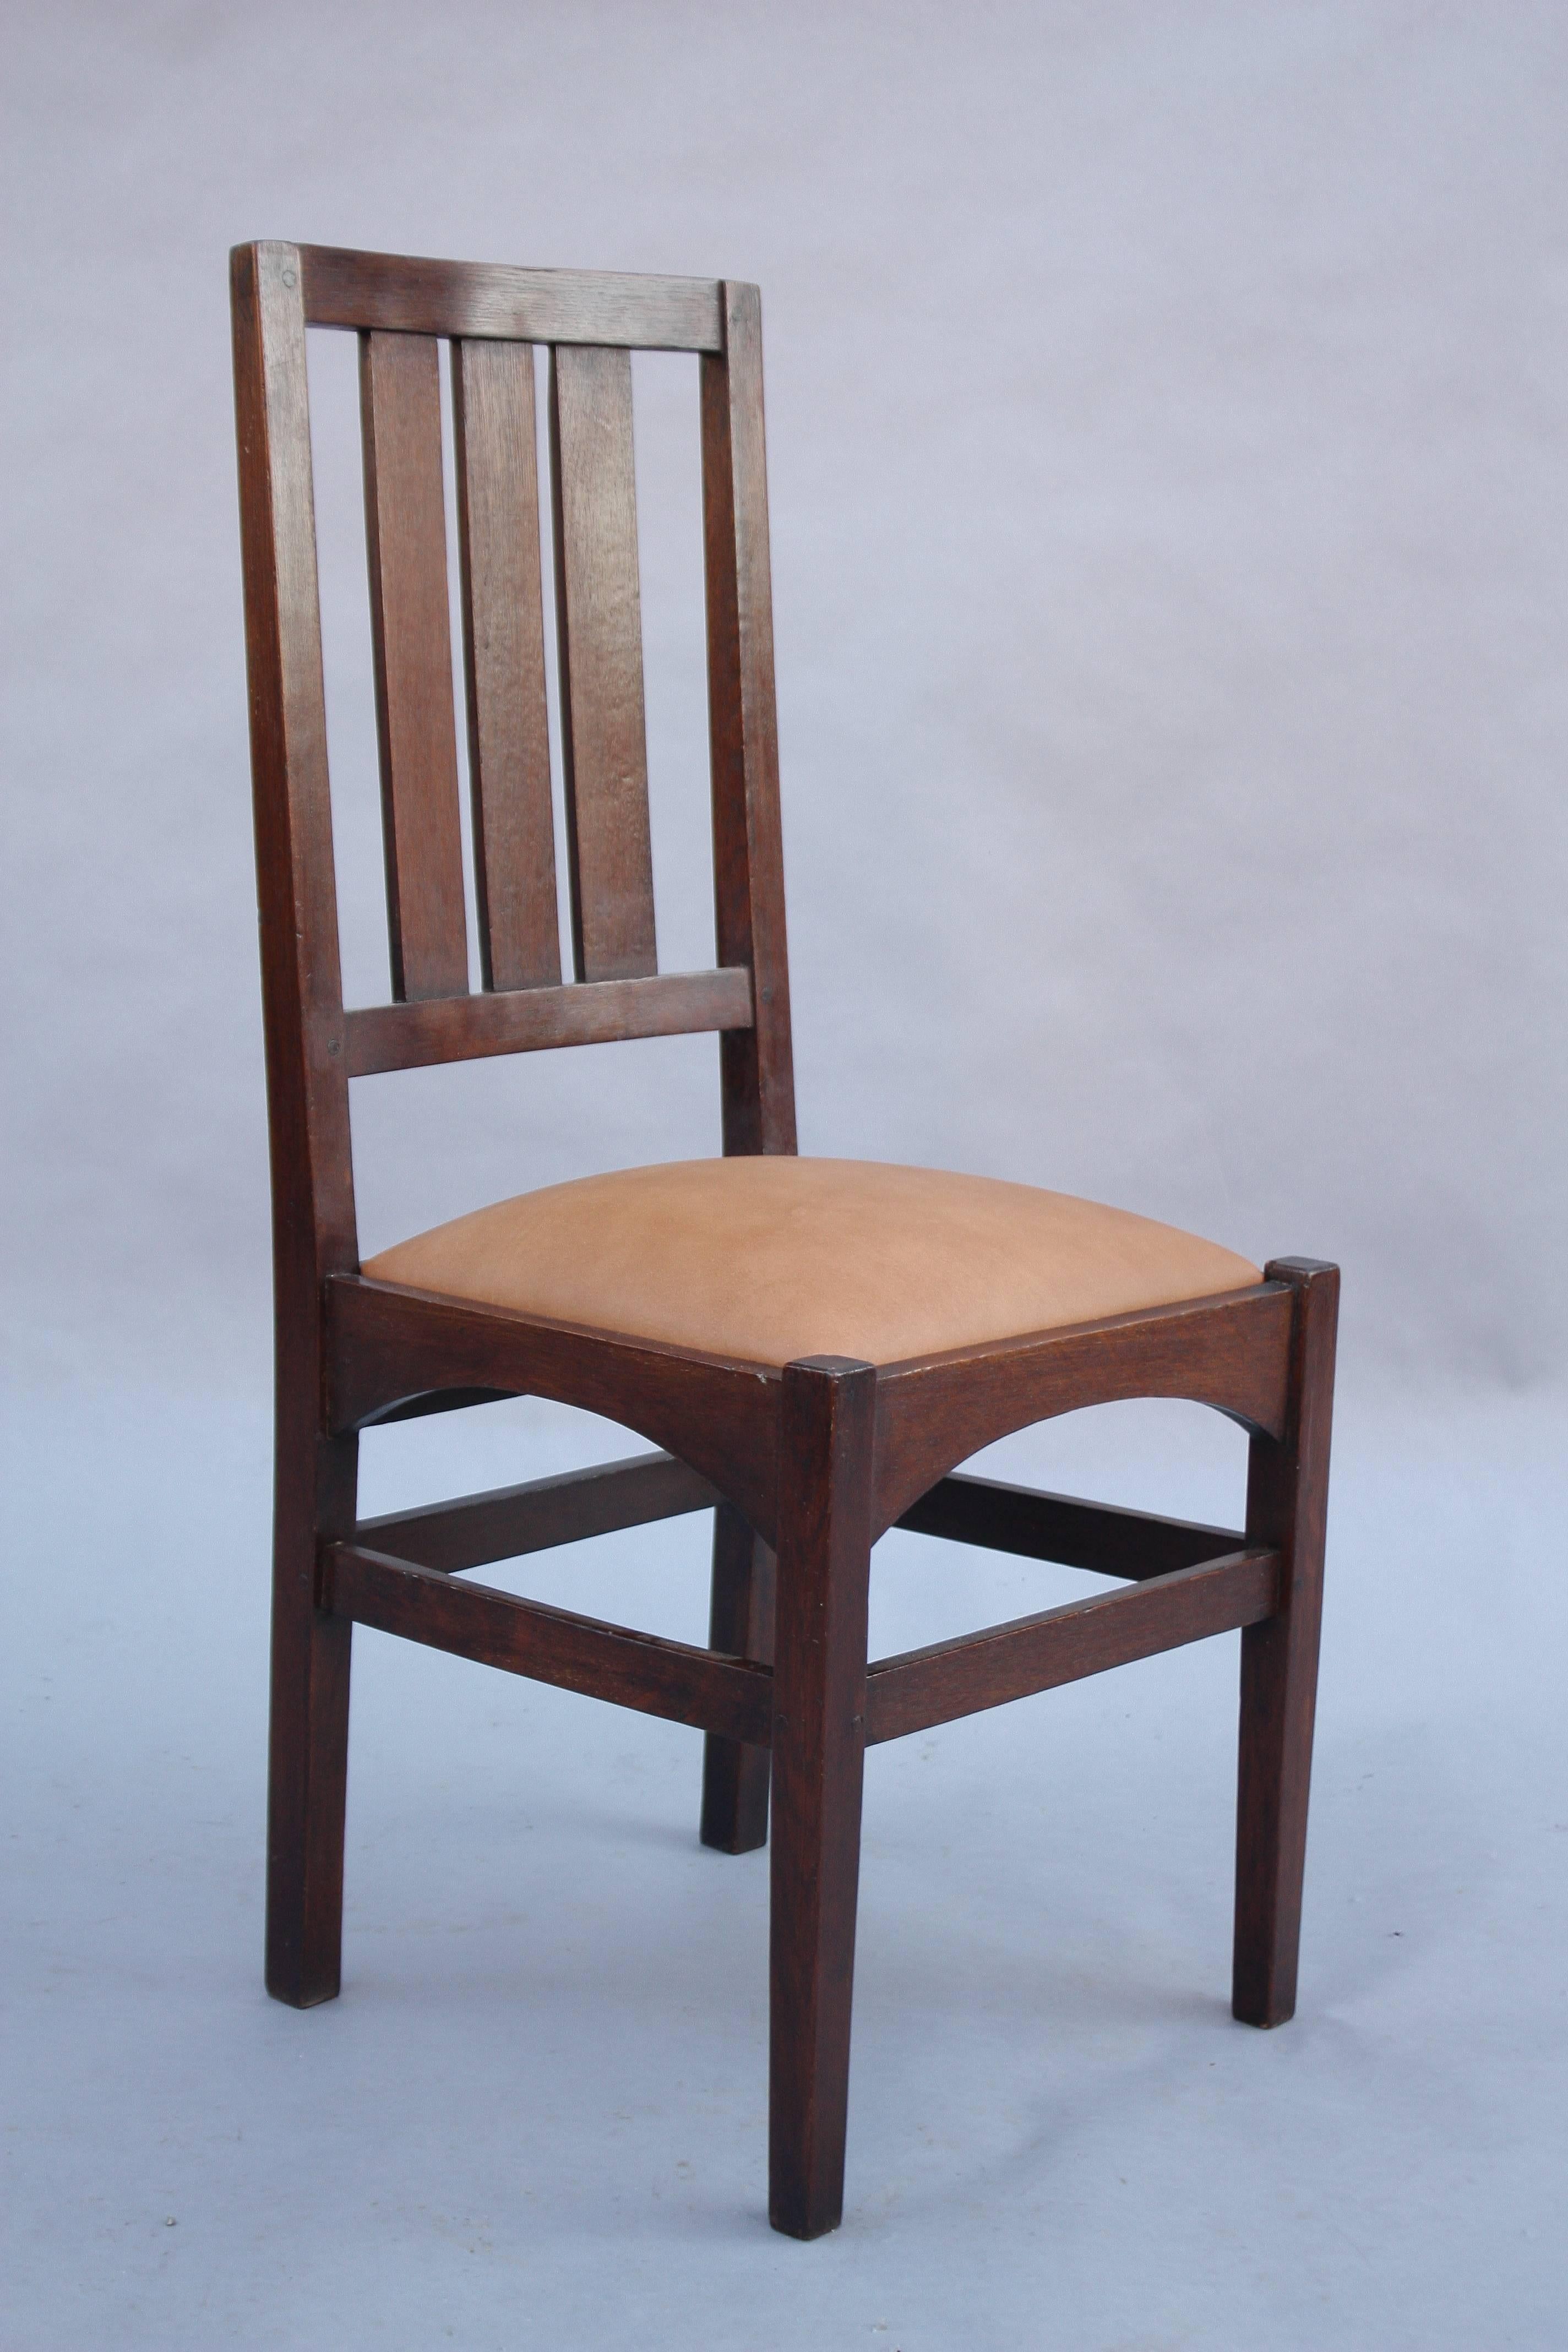 Arts & Crafts period oak side chair with new leather upholstery.